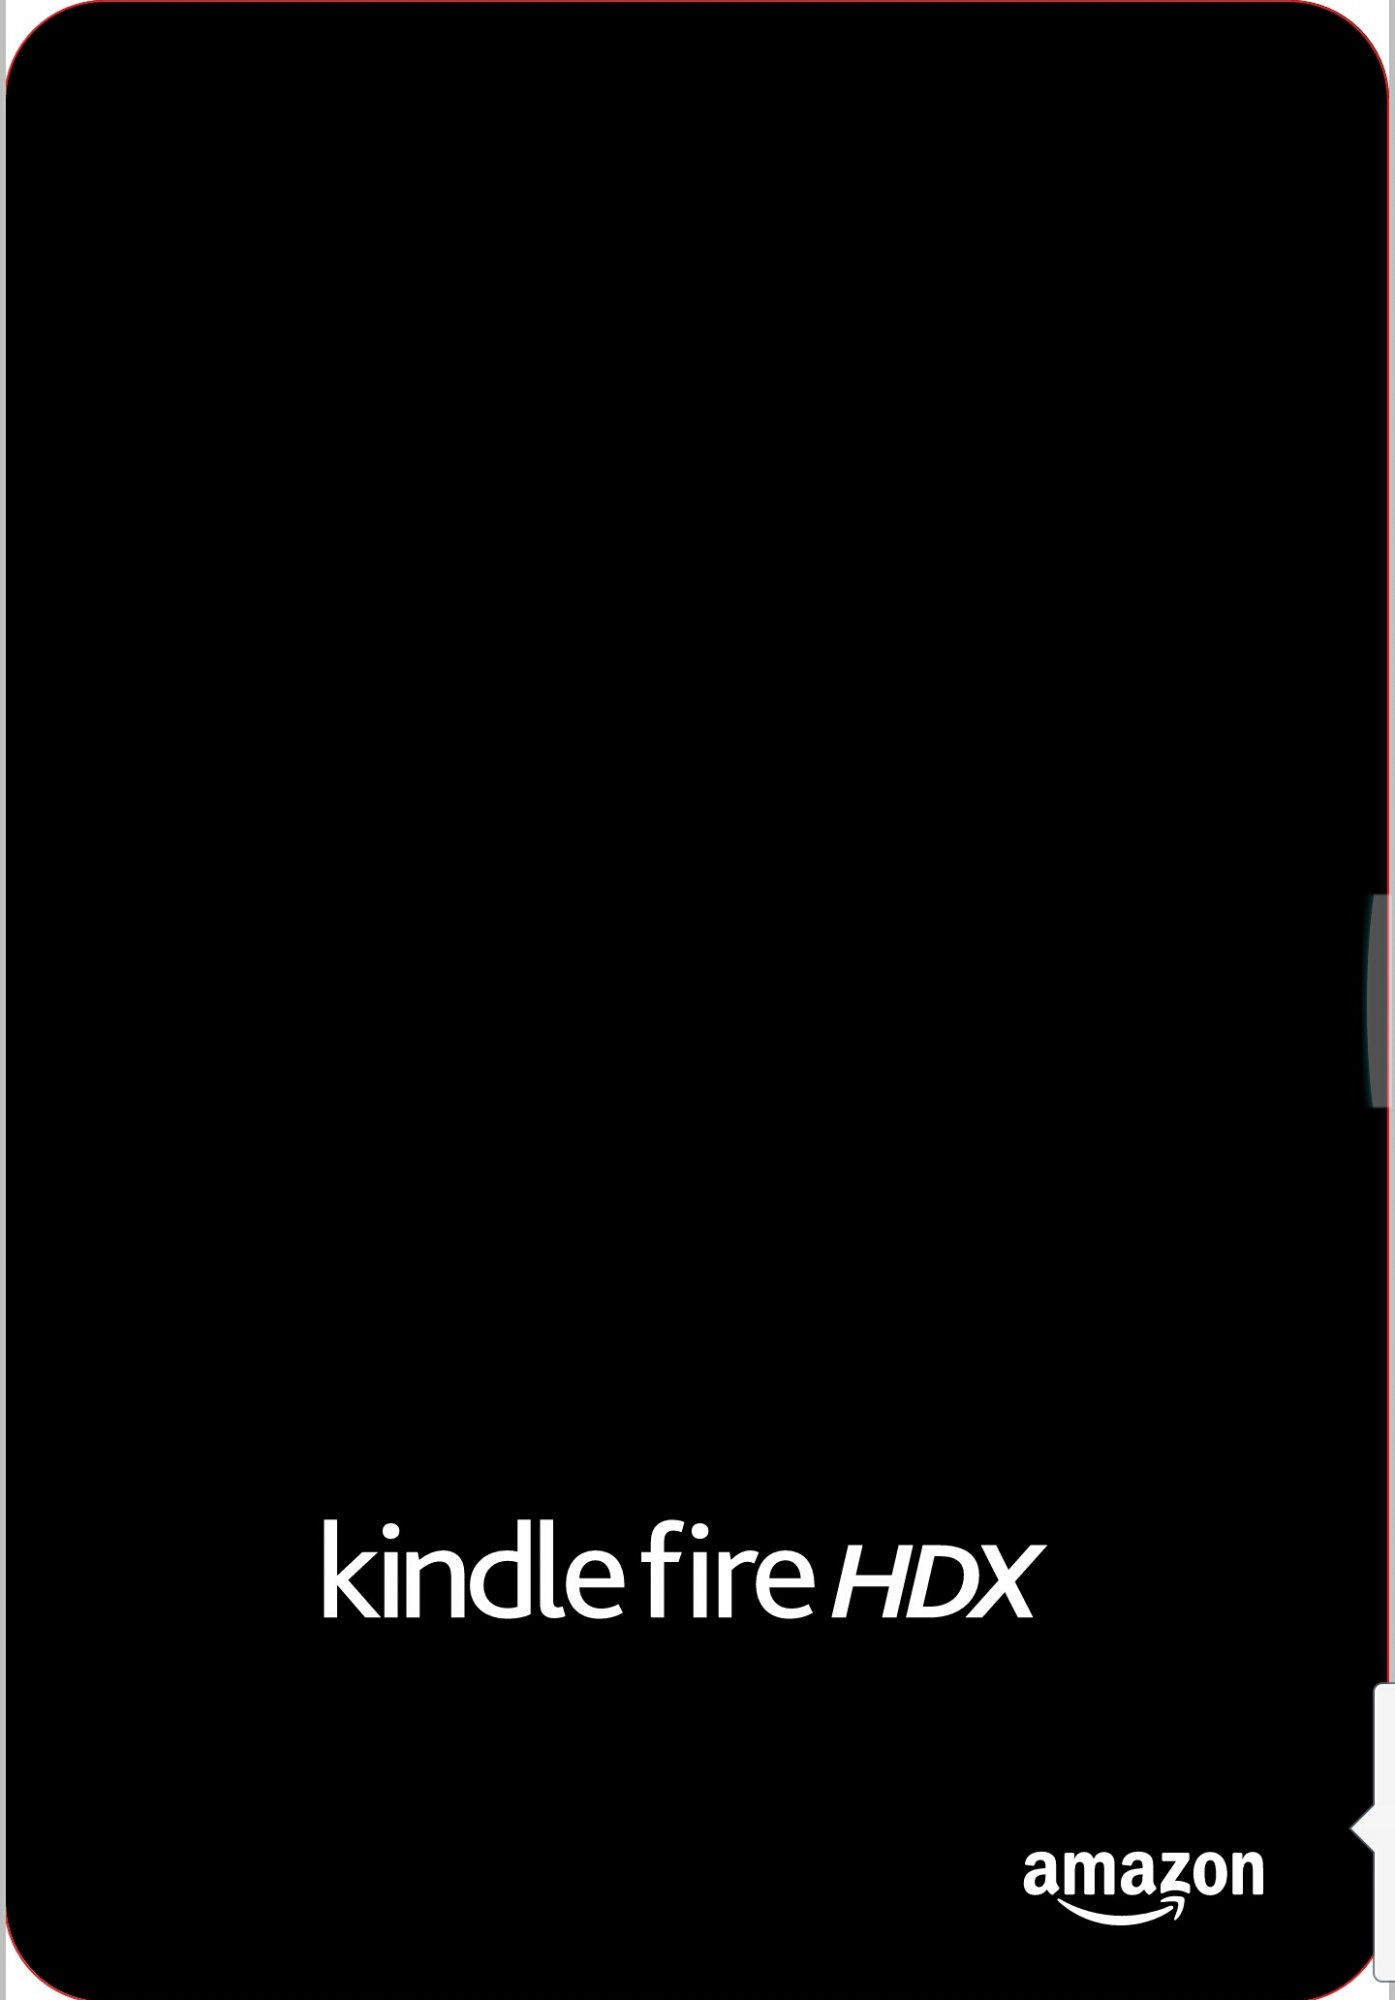 Kindle Fire HDX cover.jpg